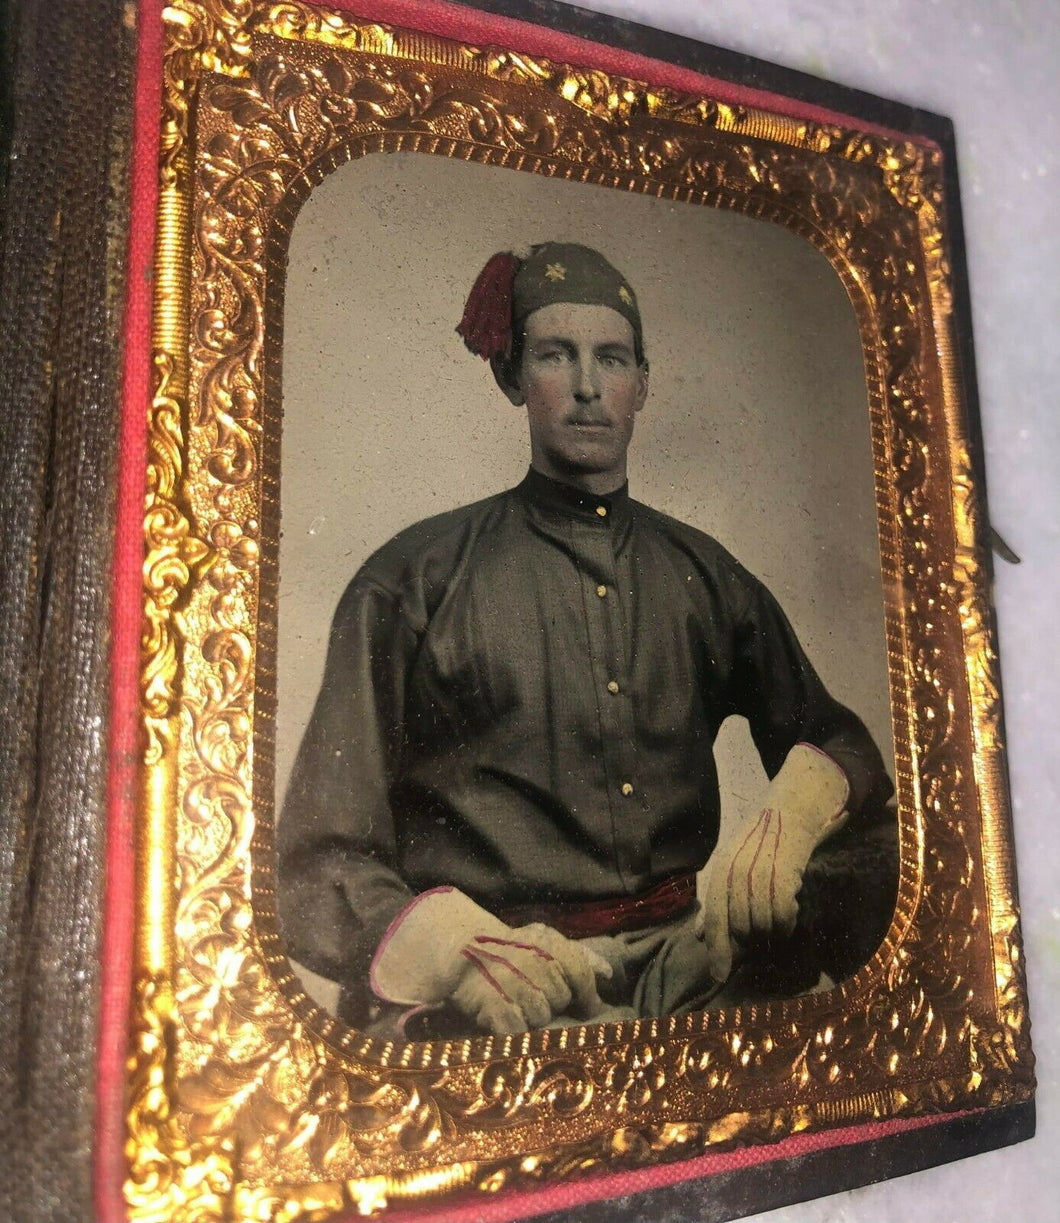 Civil War Zouave Soldier Possible ID - 4th Michigan? 1/6 Ambrotype 1860s Tinted